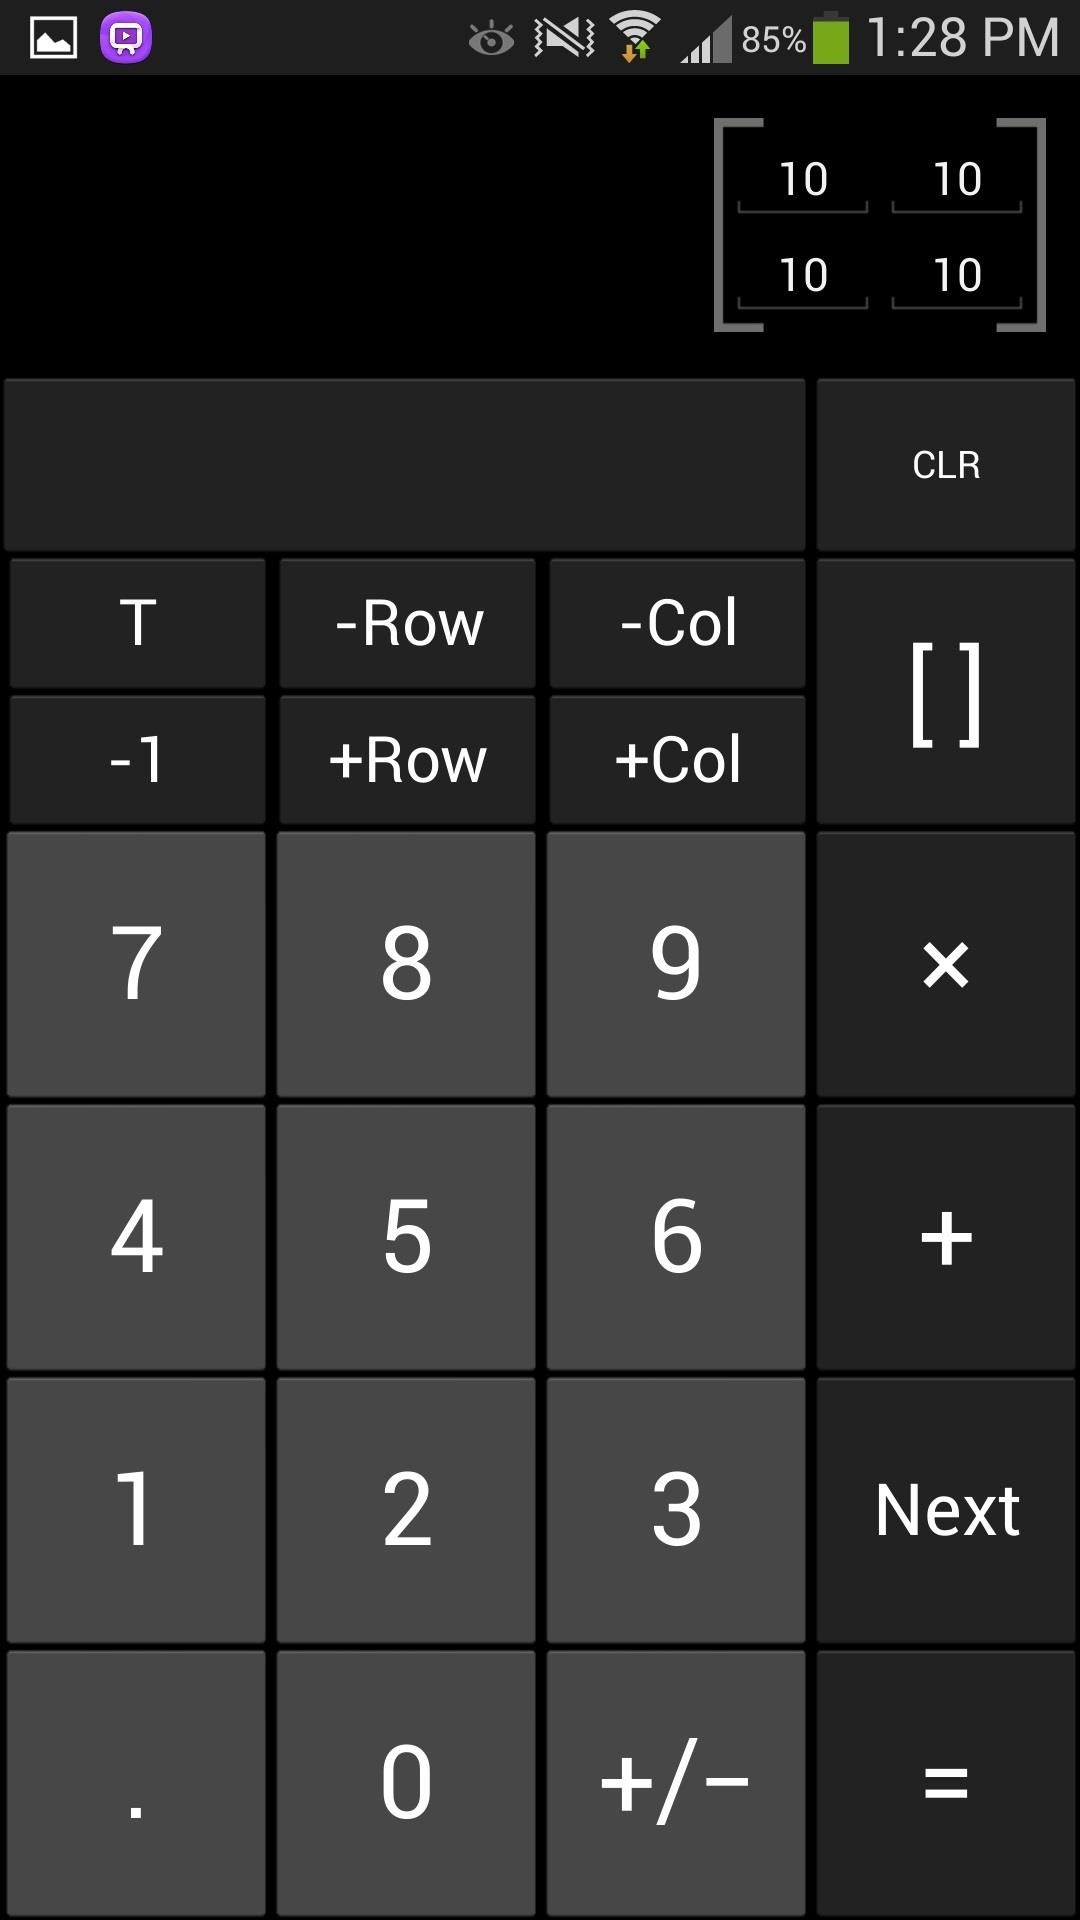 How to Get CyanogenMod's Sleek Graphing Calculator & Widget on Your Samsung Galaxy S4 Without Rooting